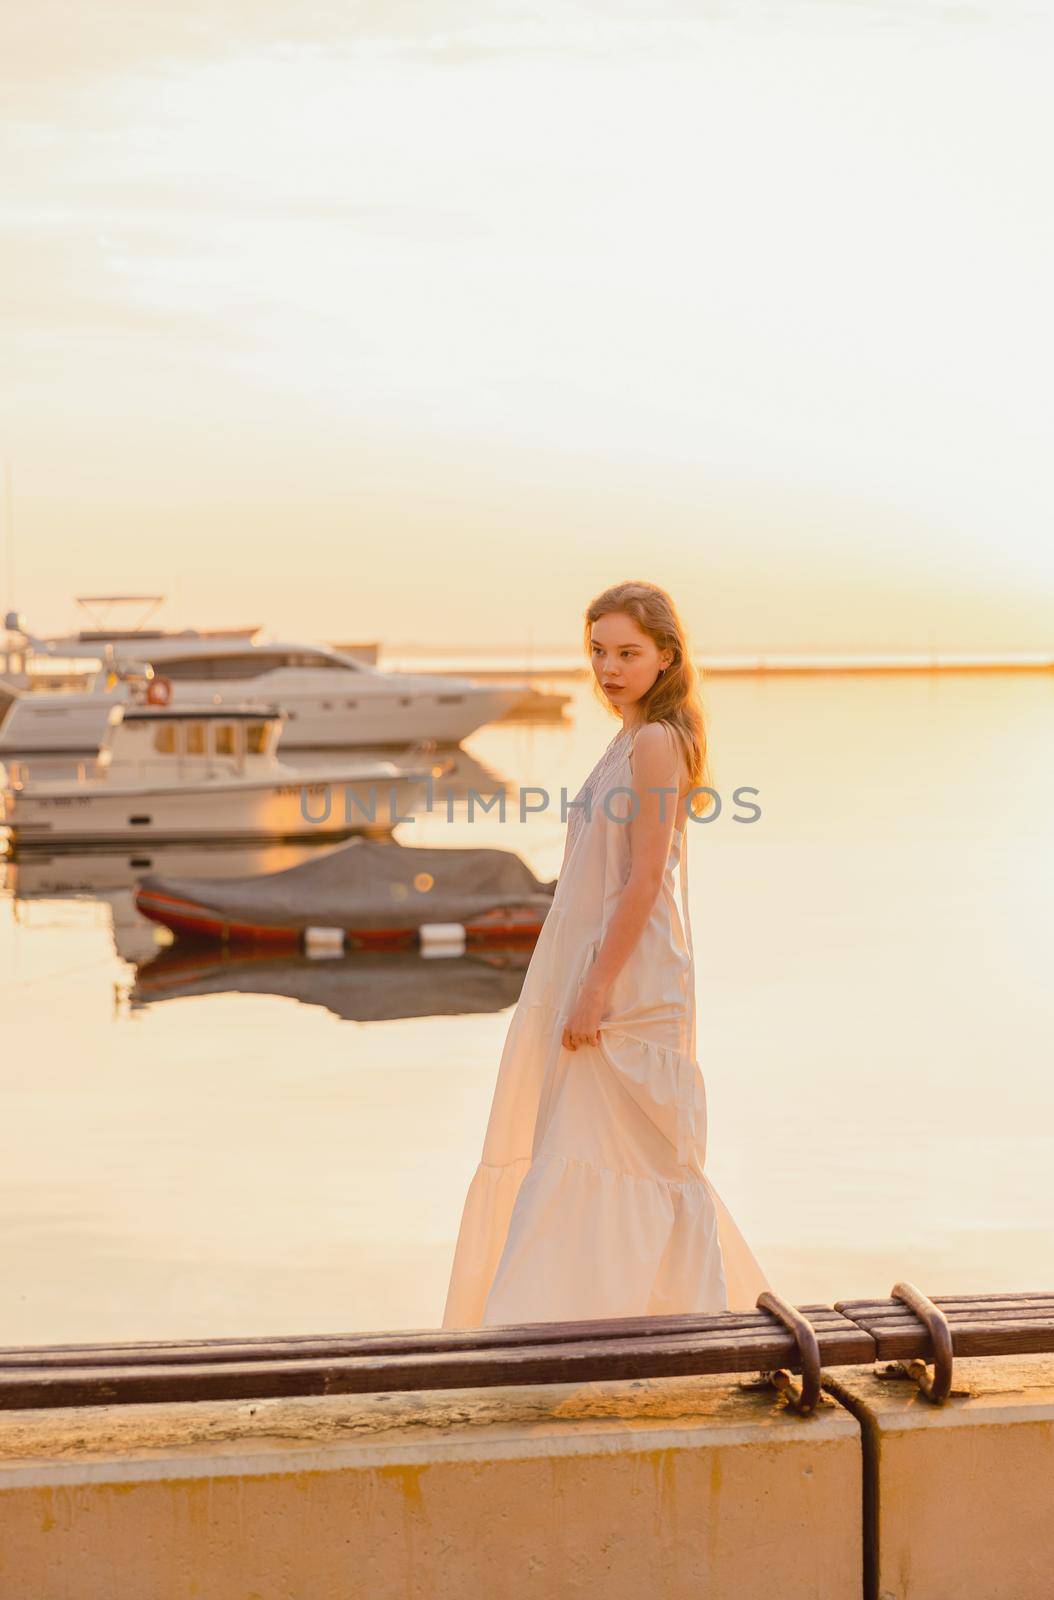 the girl is on the dock by zokov